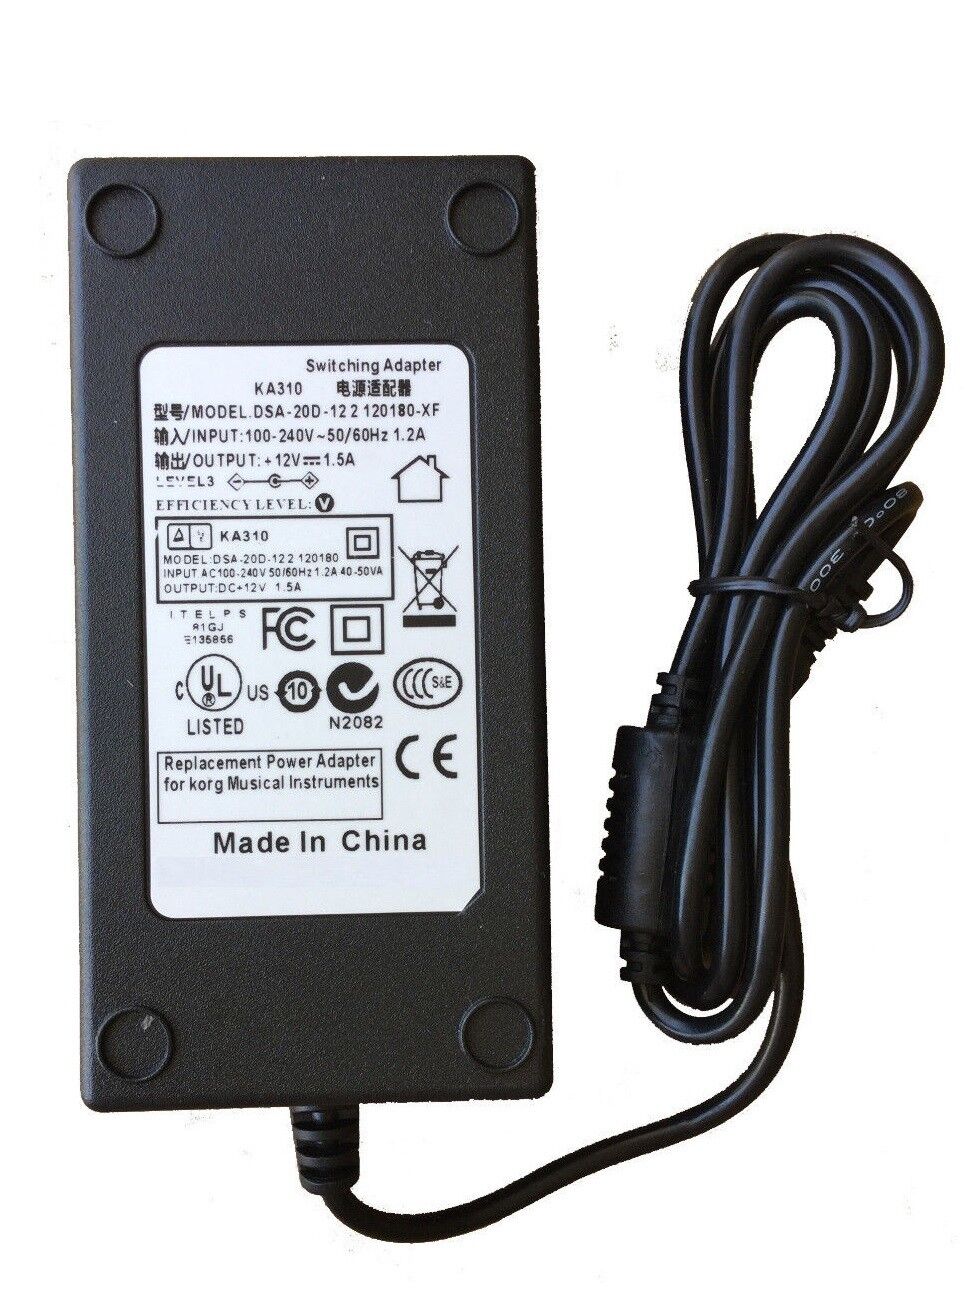 AC Adapter - Power Supply for KORG X50 61-Key Music Synthesizer Keyboard Country/Region of Manufacture China Compatible